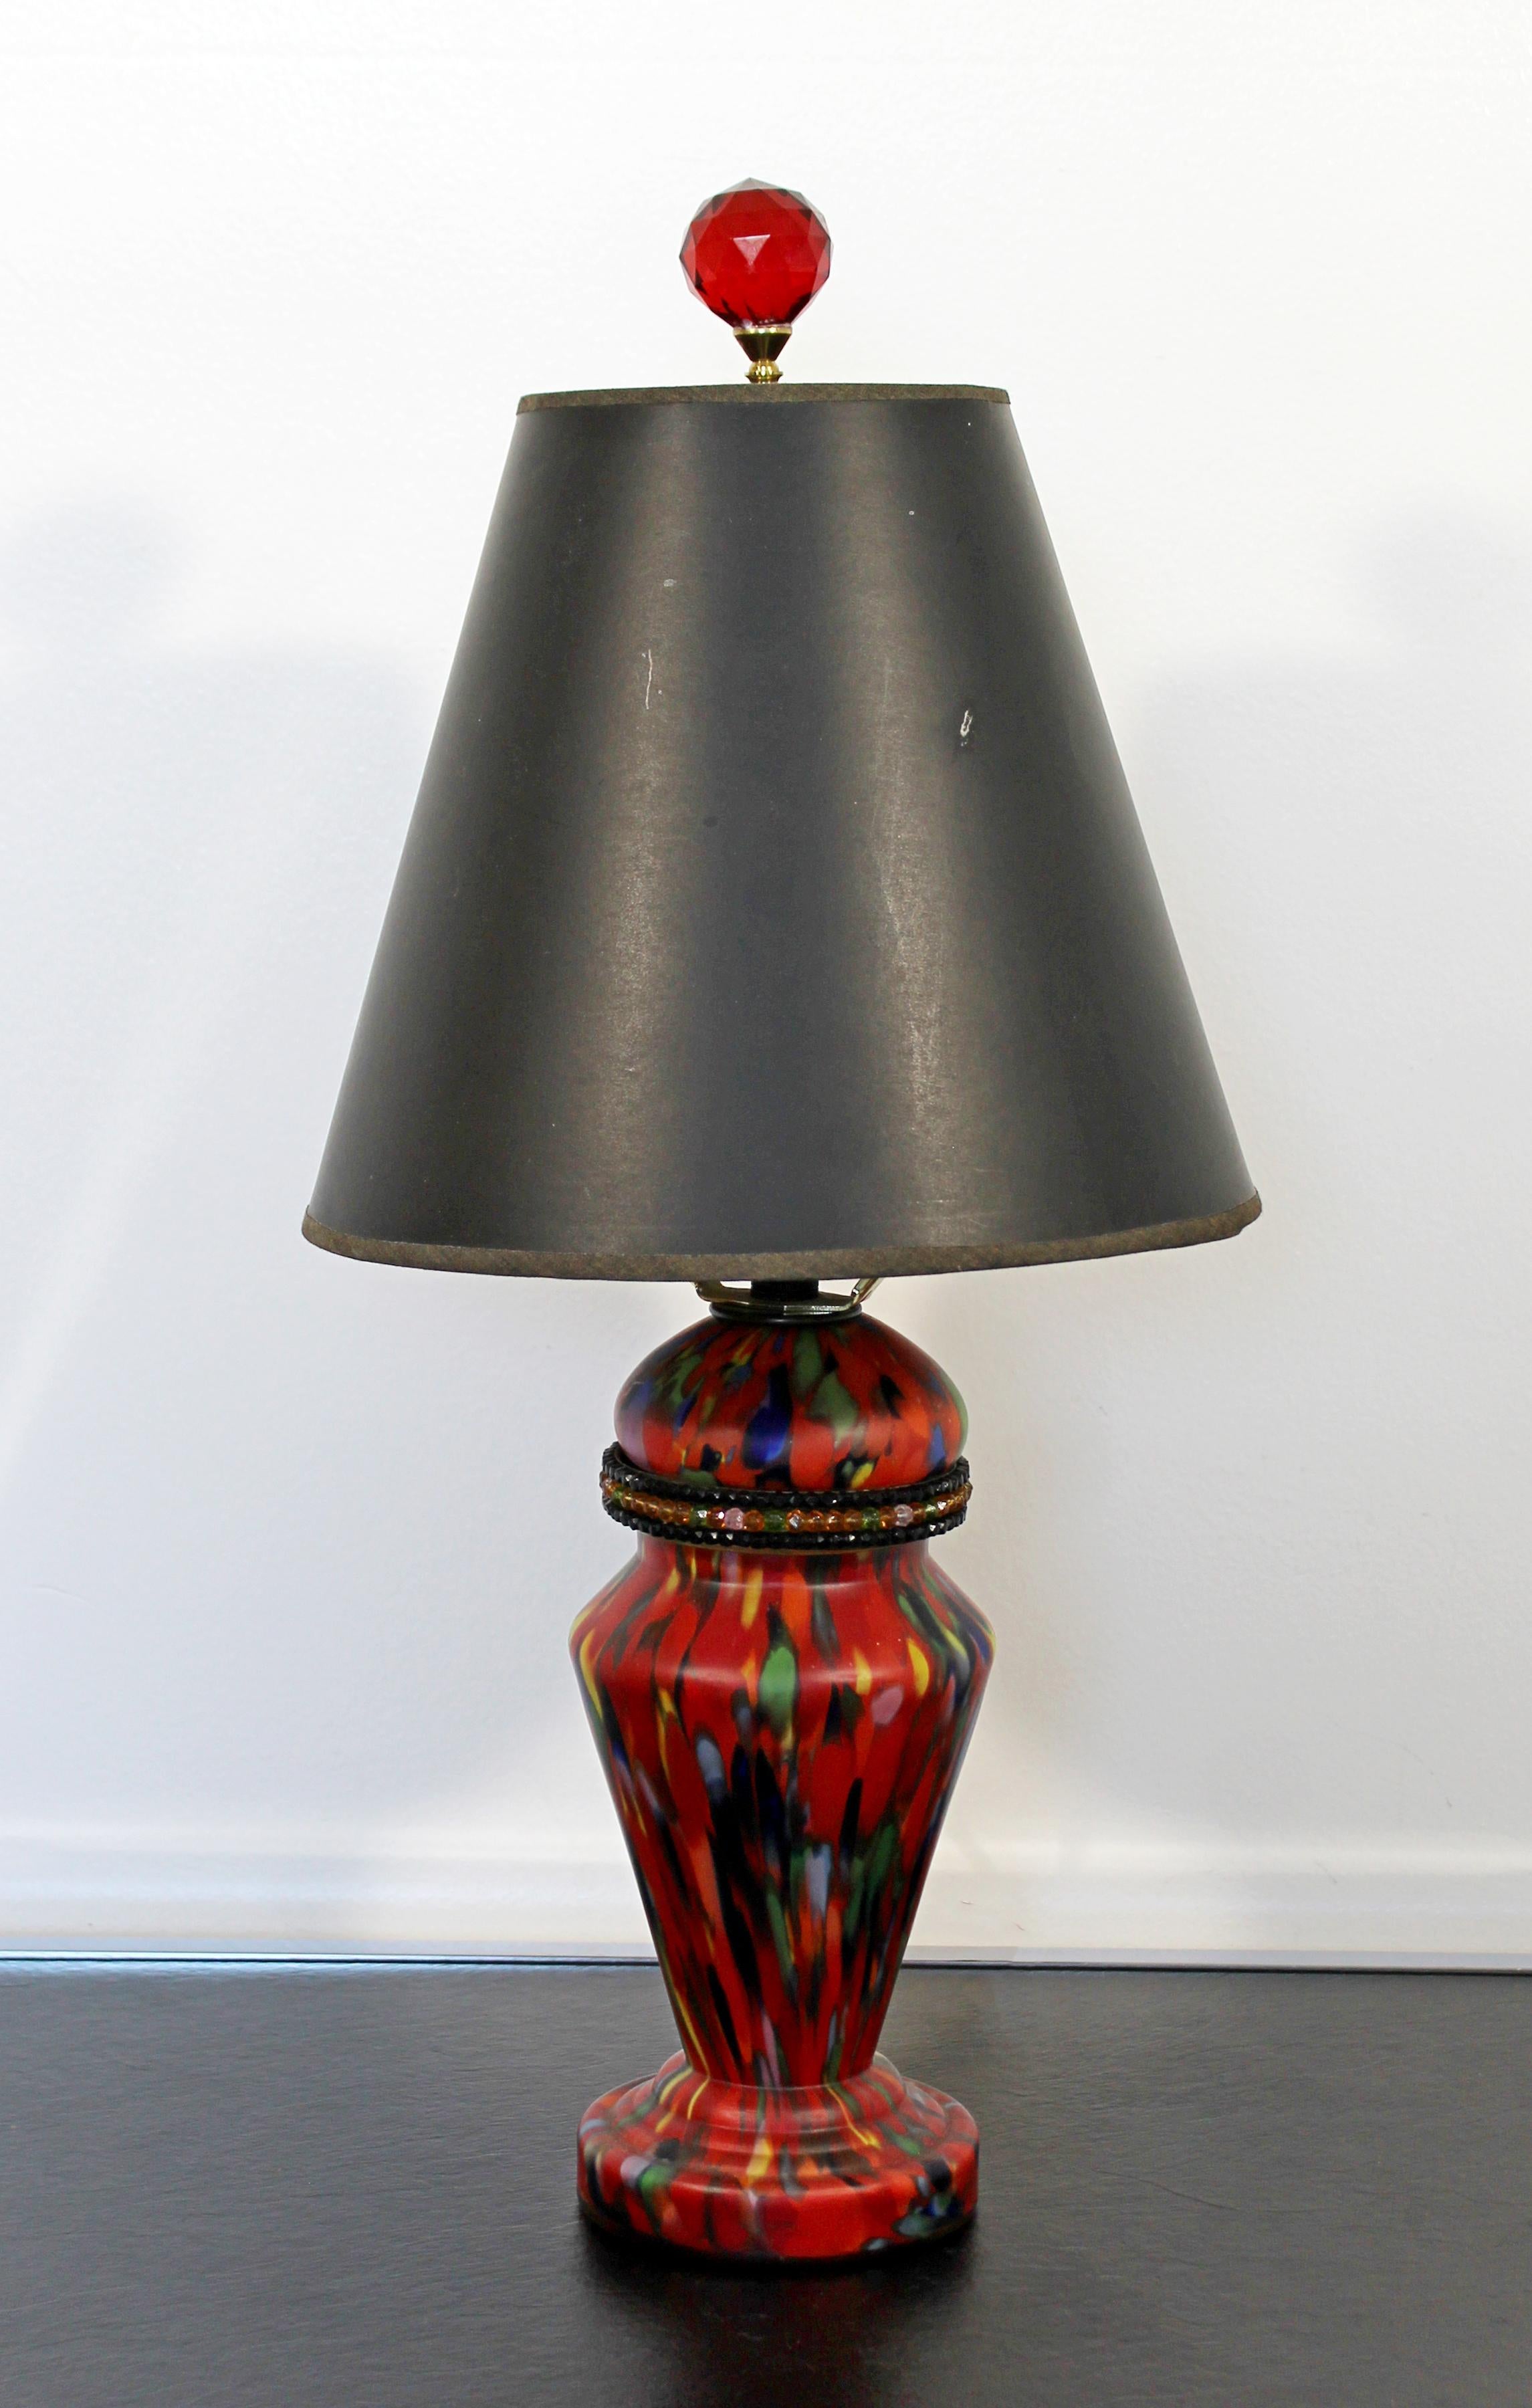 For your consideration is a magnificent table lamp, made of Czech art glass and beads, with its original finial, and that lights up three ways. In excellent condition. The dimensions are 10